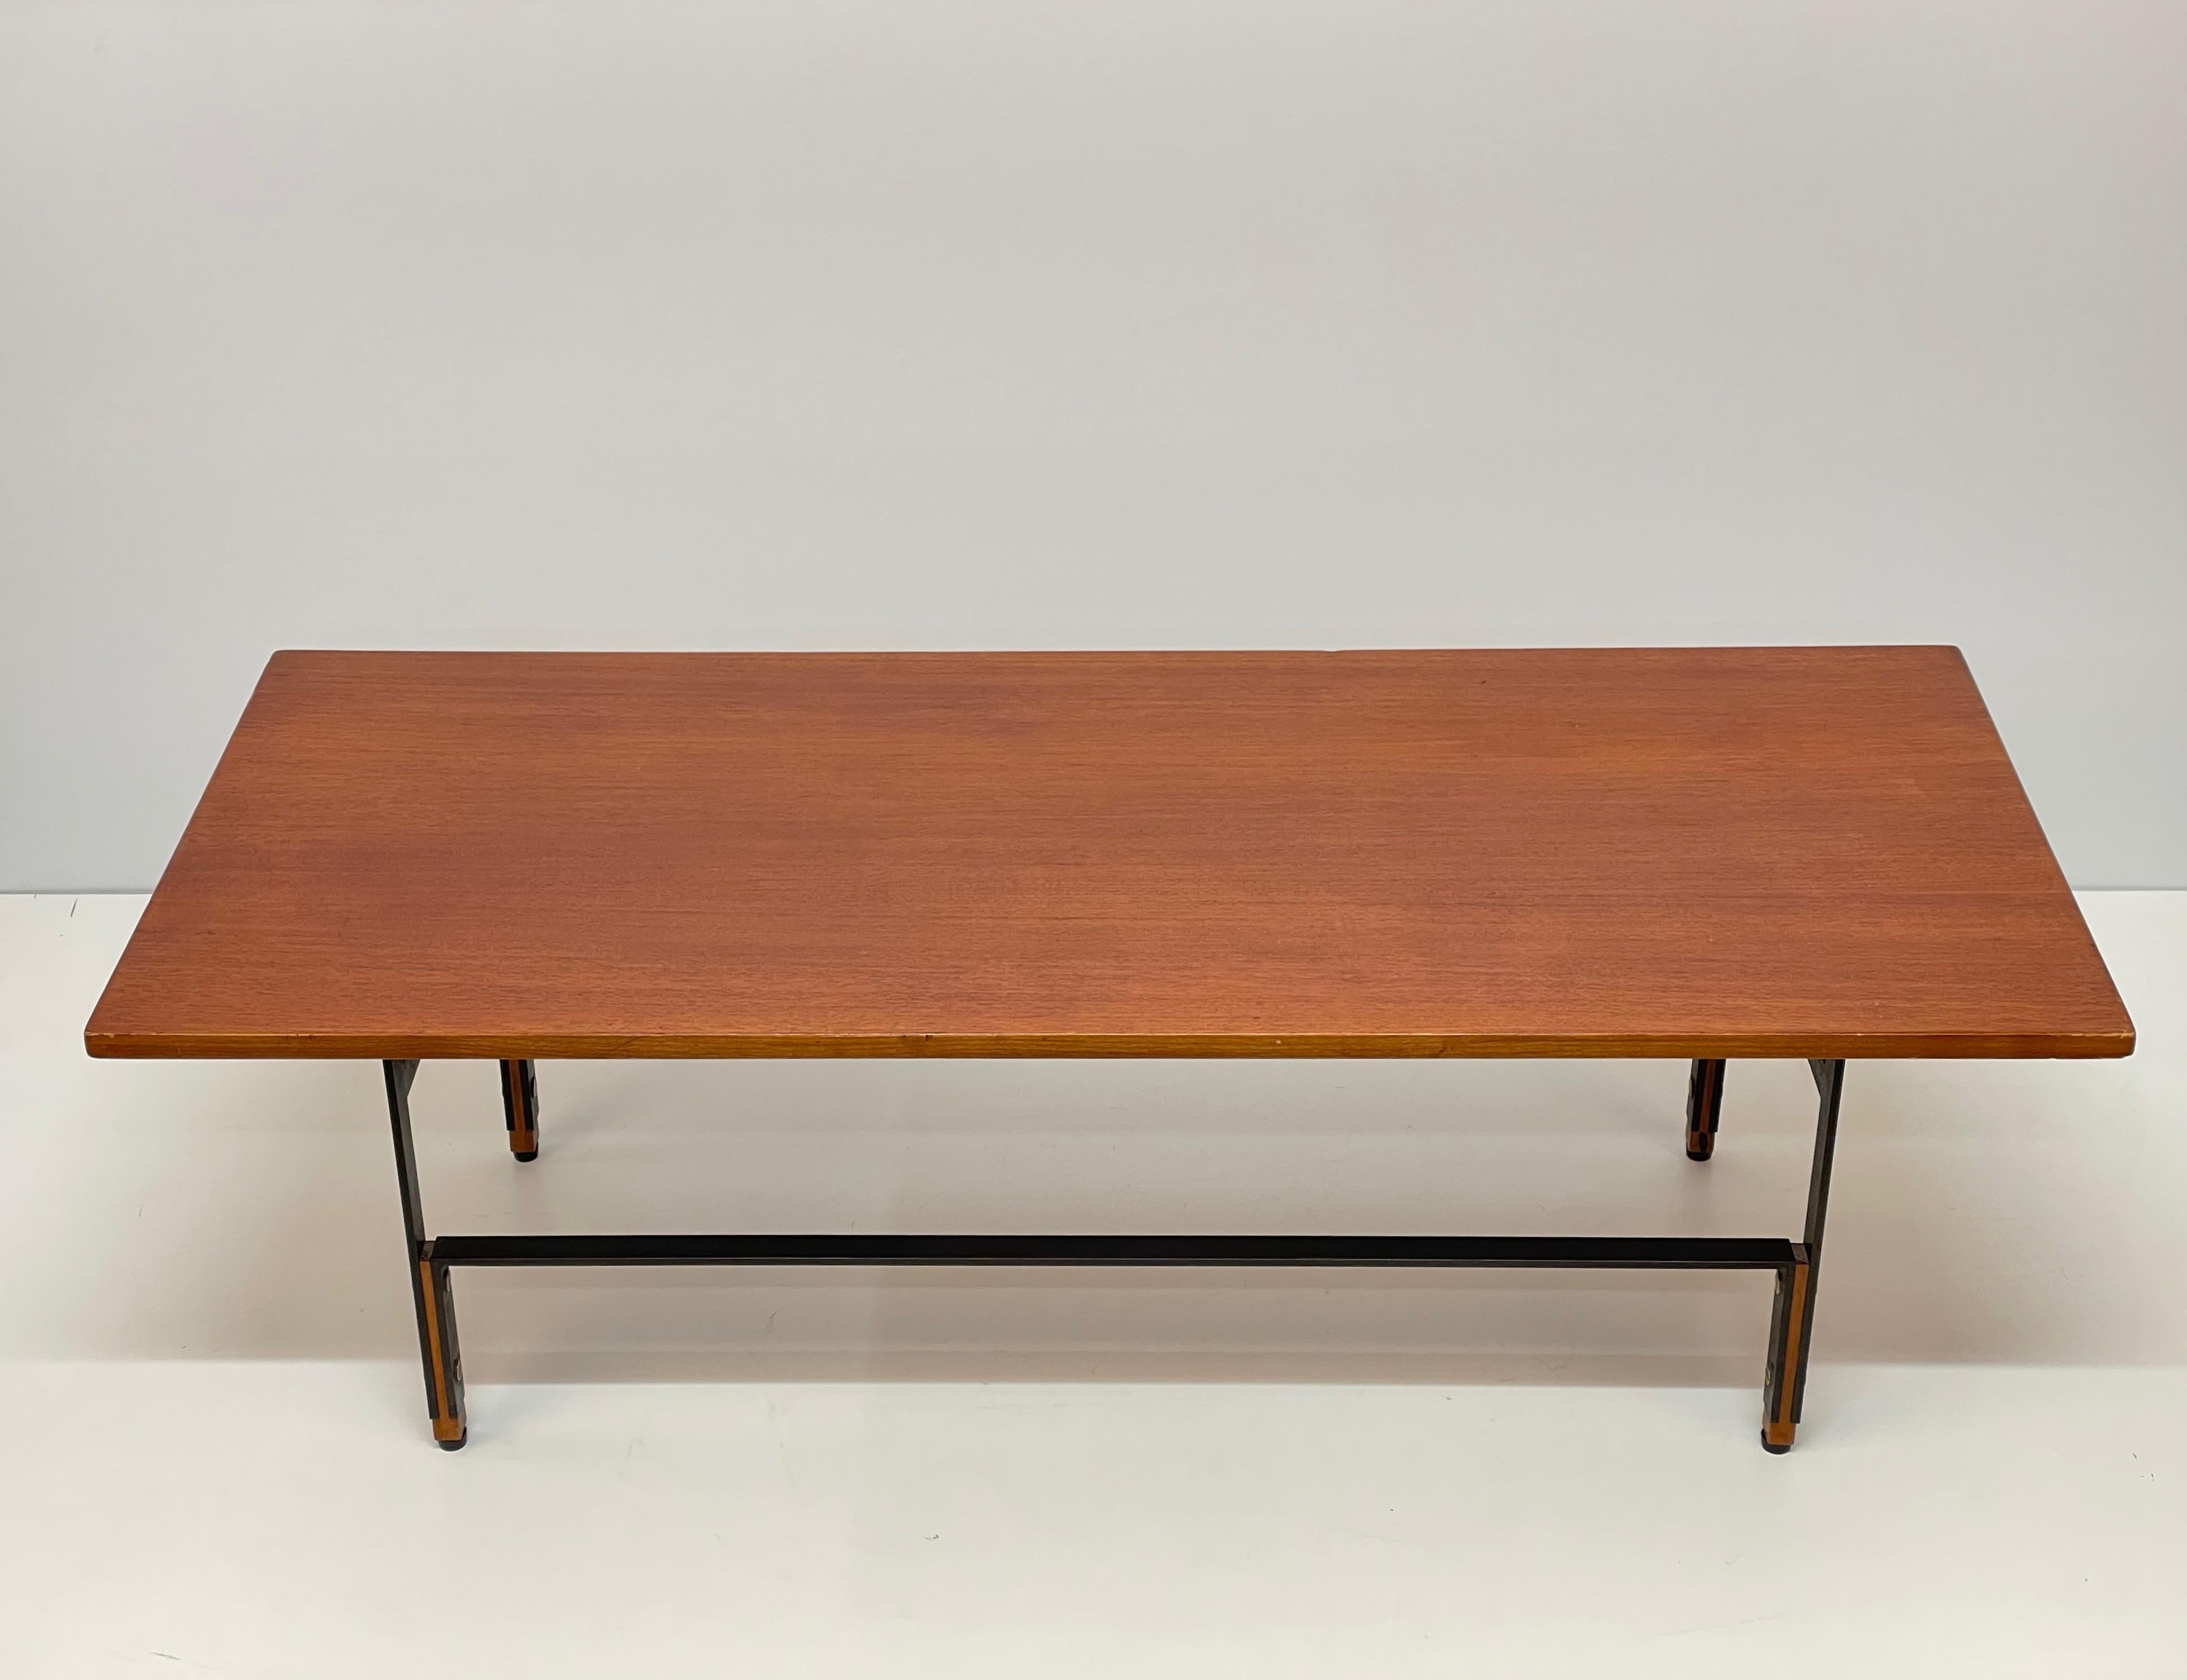 Midcentury Teak, Enamelled Iron and Brass Italian Coffee Table, 1960s For Sale 5